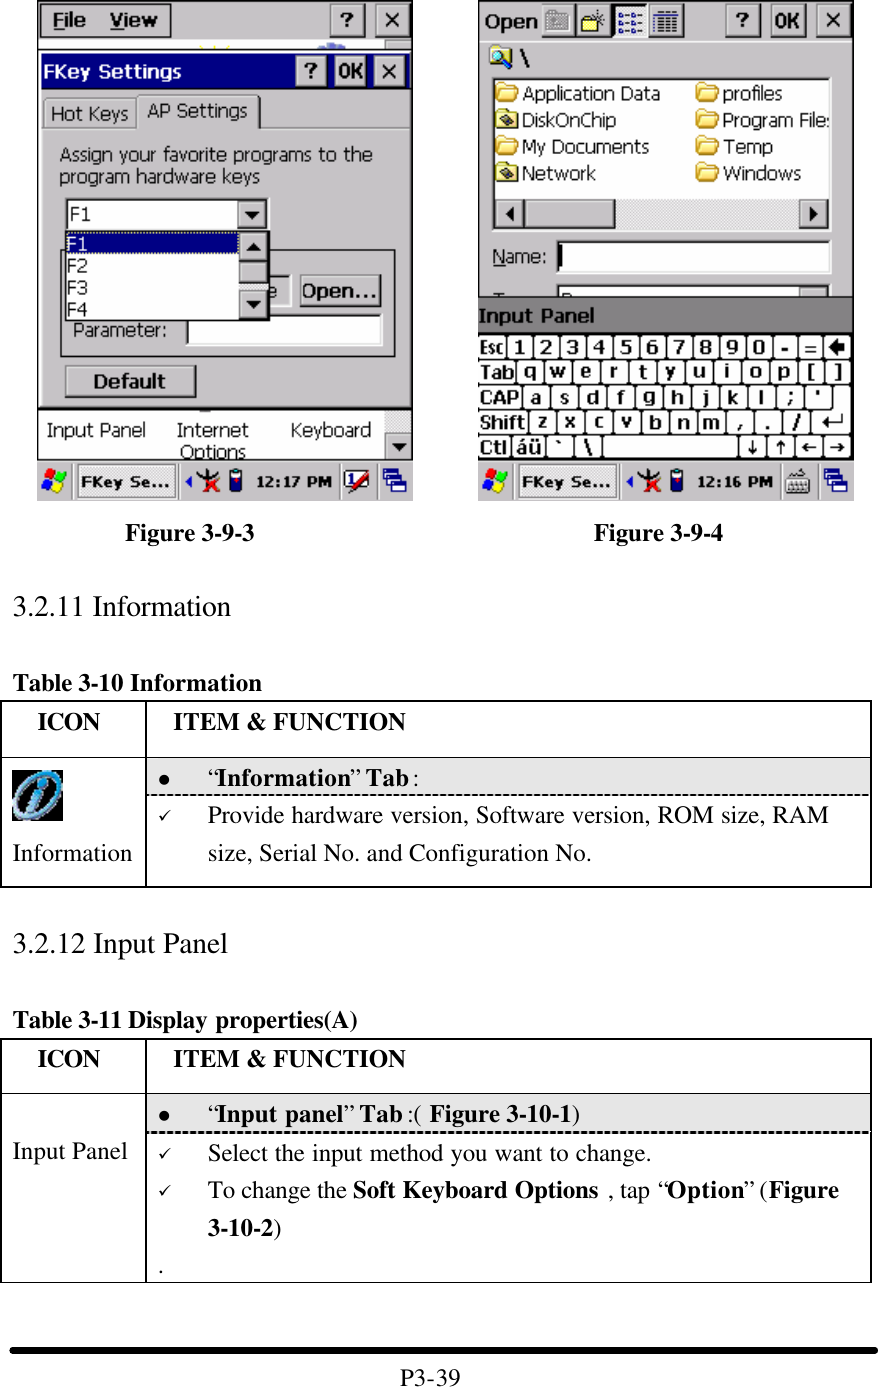                 Figure 3-9-3                           Figure 3-9-4    3.2.11 Information  Table 3-10 Information   ICON  ITEM &amp; FUNCTION l “Information” Tab :    Information ü Provide hardware version, Software version, ROM size, RAM size, Serial No. and Configuration No.  3.2.12 Input Panel  Table 3-11 Display properties(A)   ICON  ITEM &amp; FUNCTION l “Input panel” Tab :( Figure 3-10-1)    Input Panel ü Select the input method you want to change. ü To change the Soft Keyboard Options , tap “Option” (Figure 3-10-2) .   P3-39 